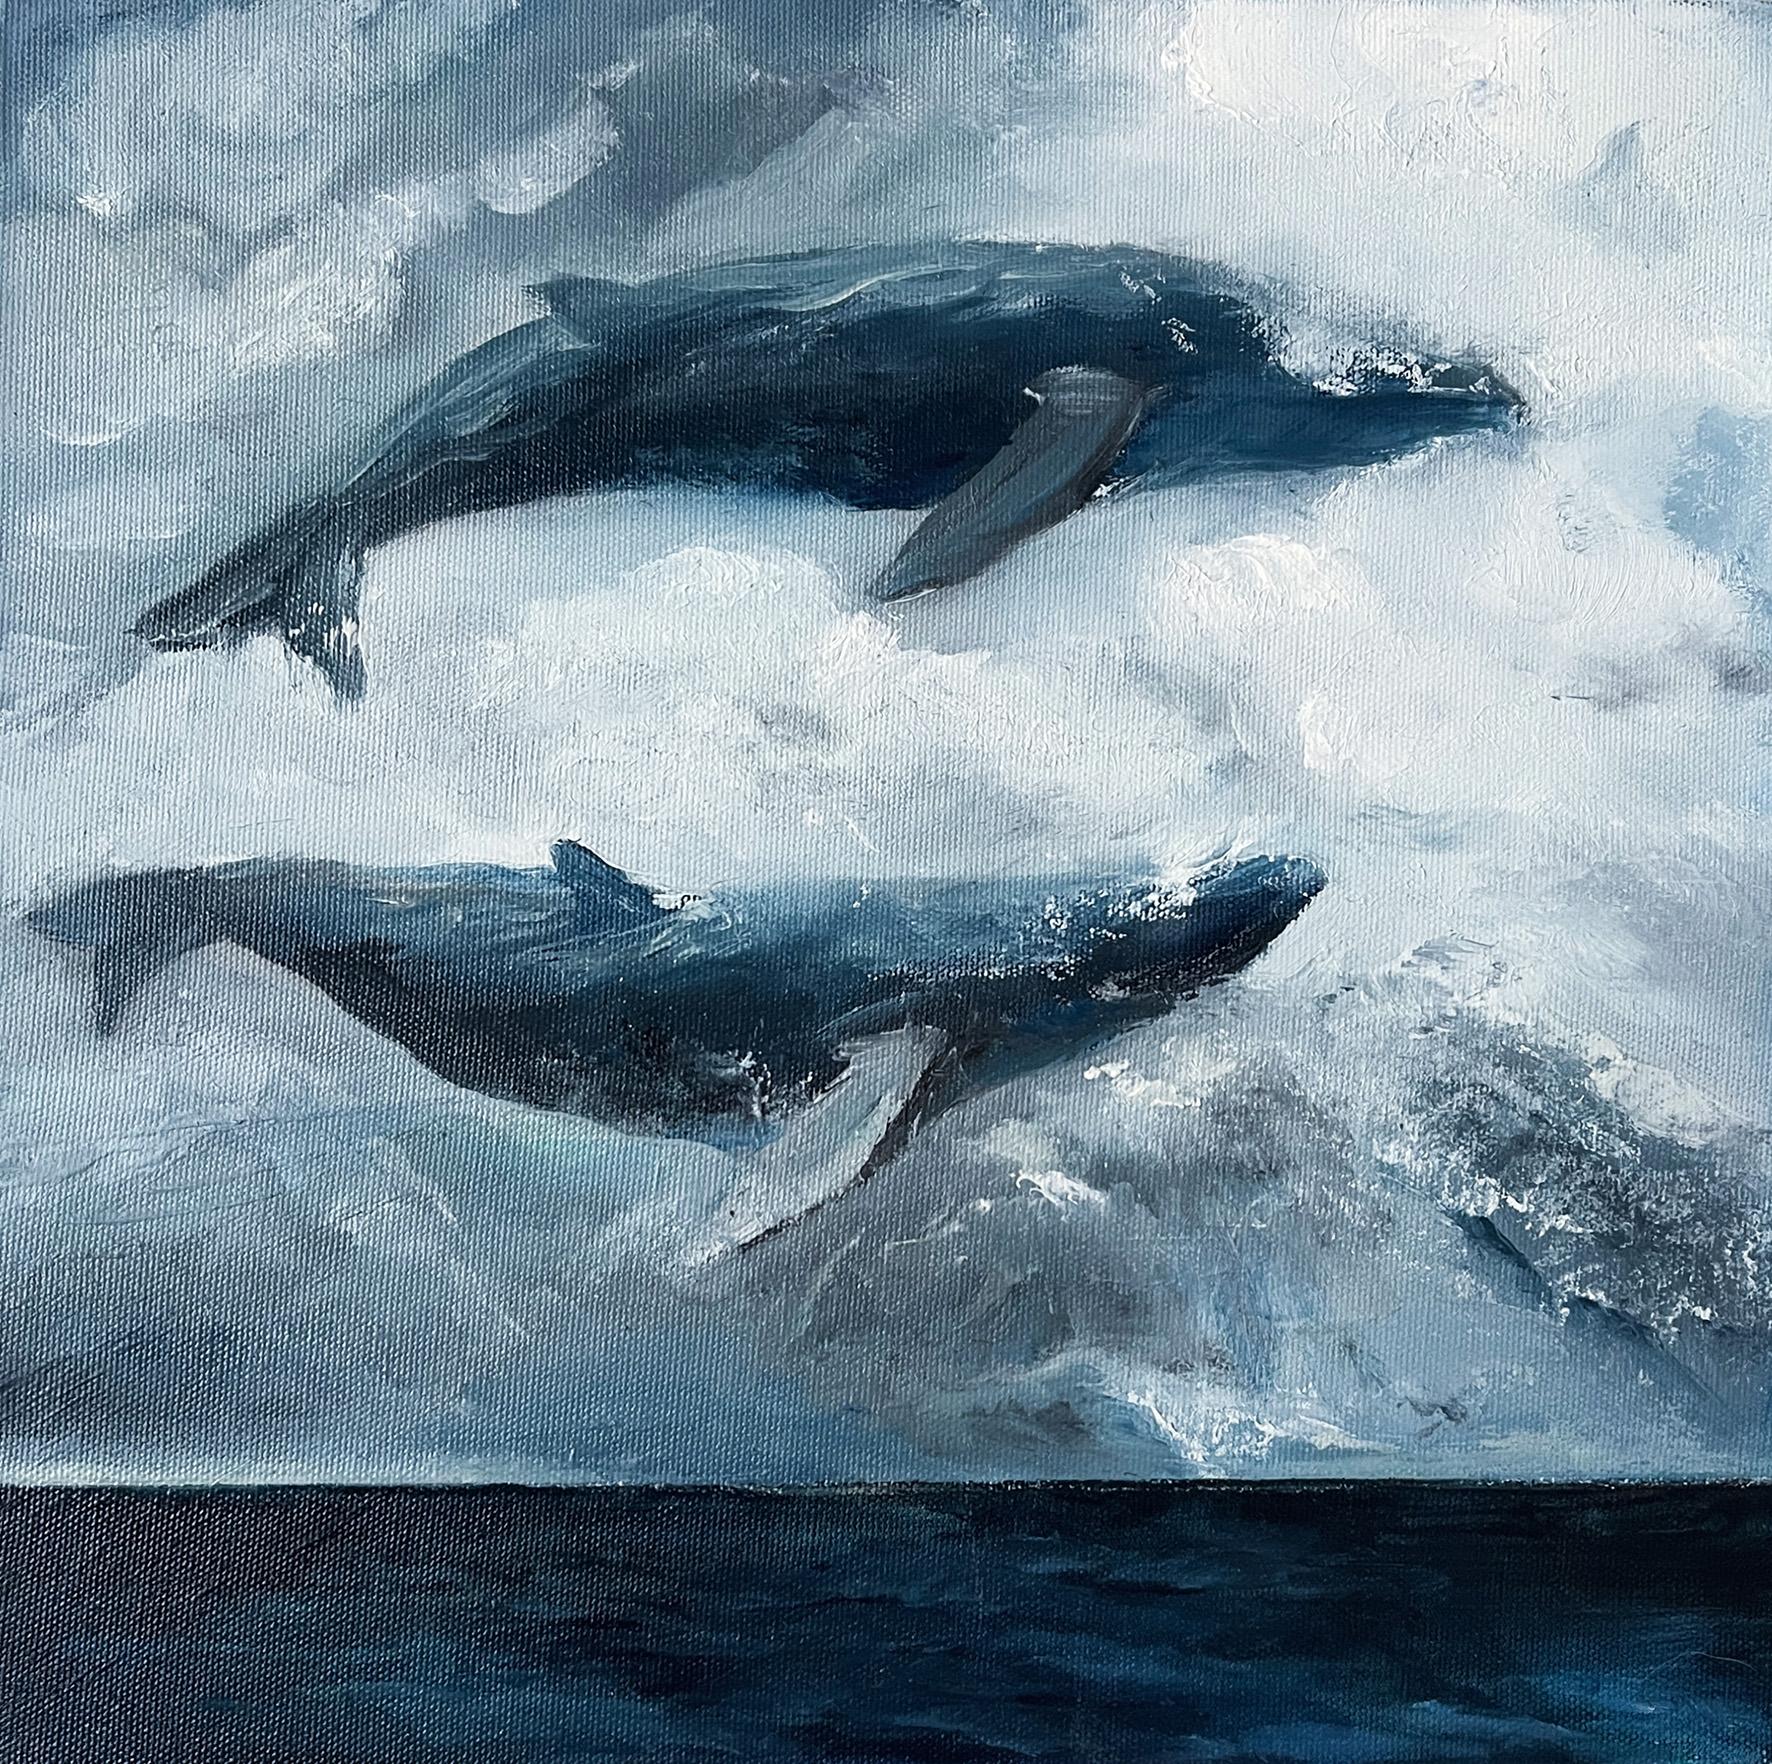 Lesia Danilina Landscape Painting - "Heavenly ocean" whales in the sky, seascape, sky, clouds, storm, rain